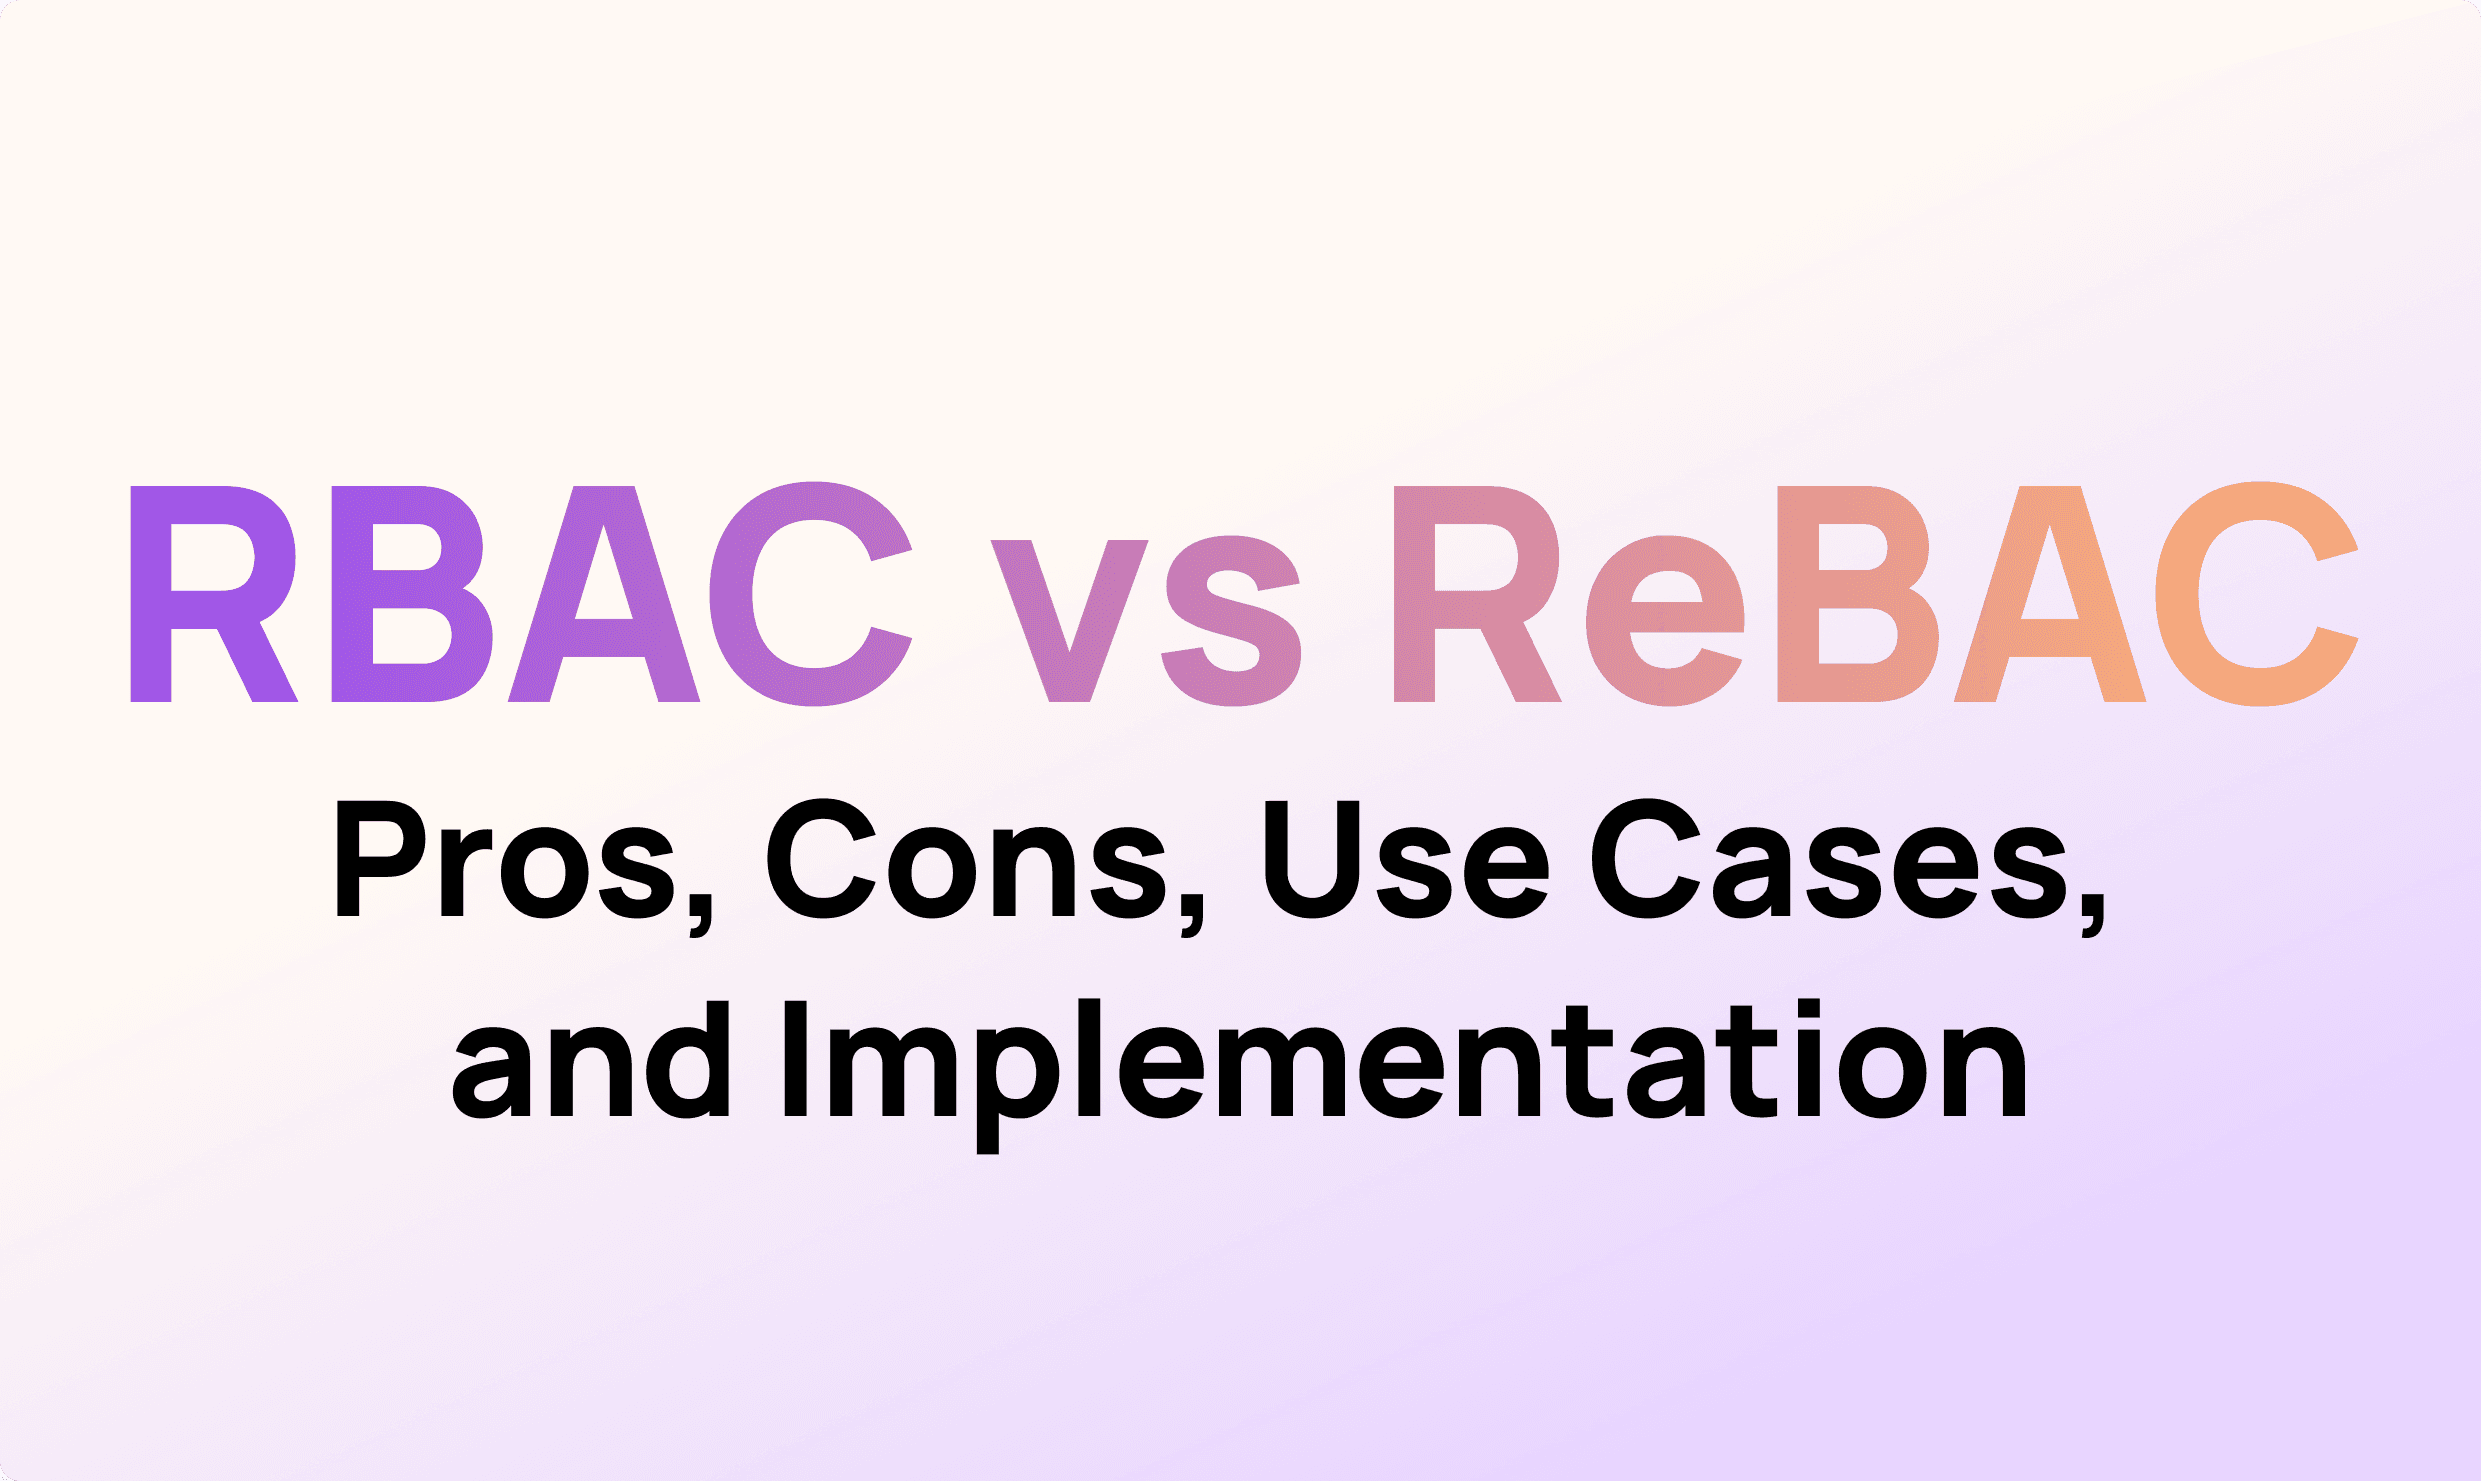 Role-Based Access Control (RBAC) VS. Relationship-Based Access Control (ReBAC)